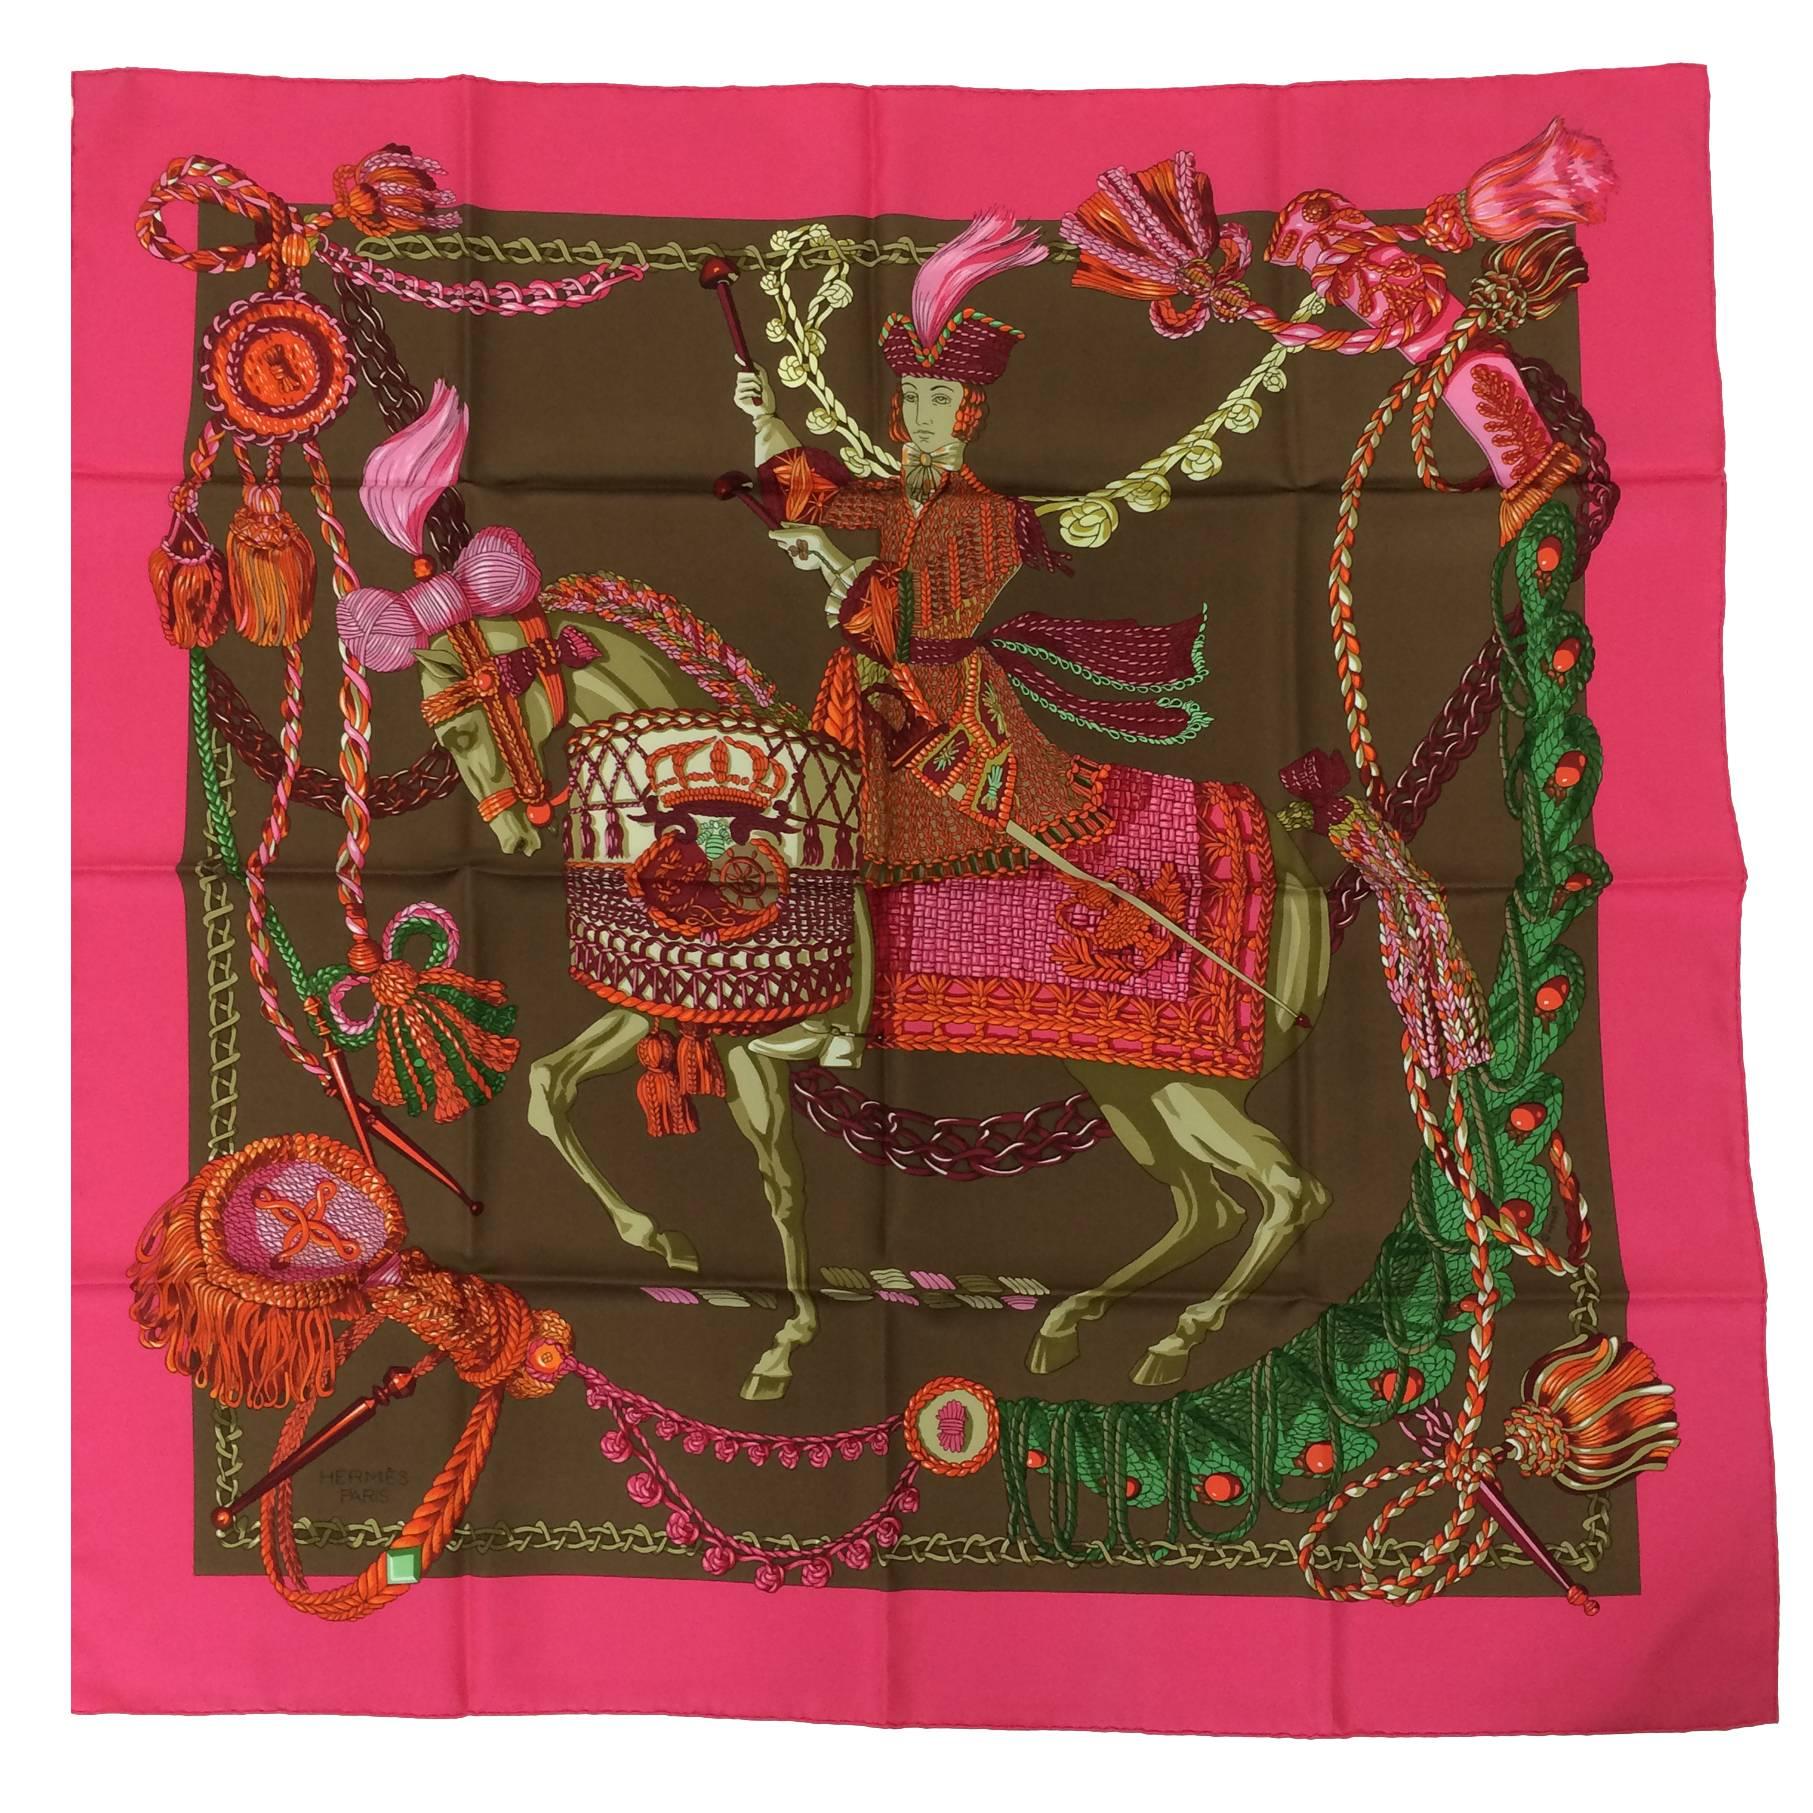 Hermes  Le Timbalier silk twill scarf by Françoise Heron NWT 36" x 36"